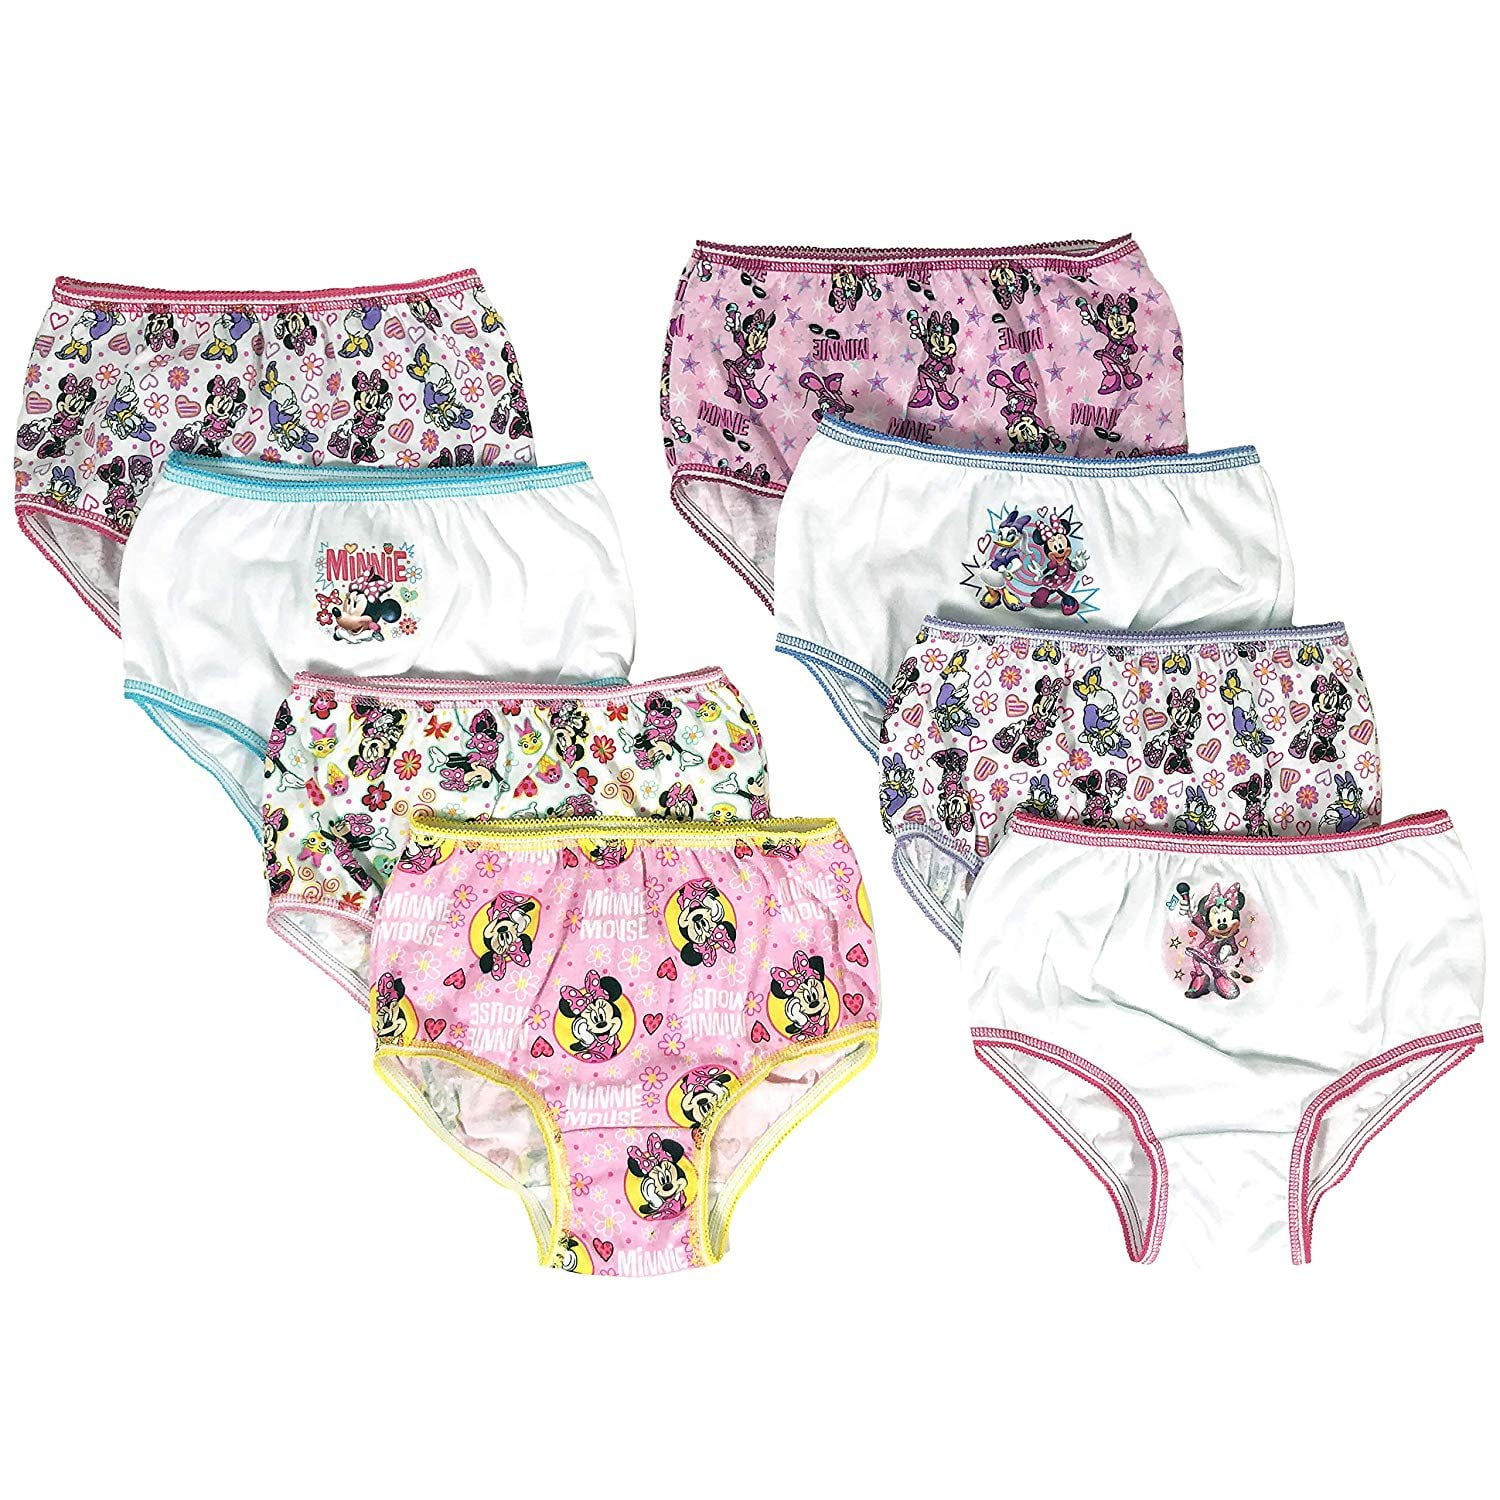 Disney Minnie three of a kind briefs for girl: for sale at 4.99€ on